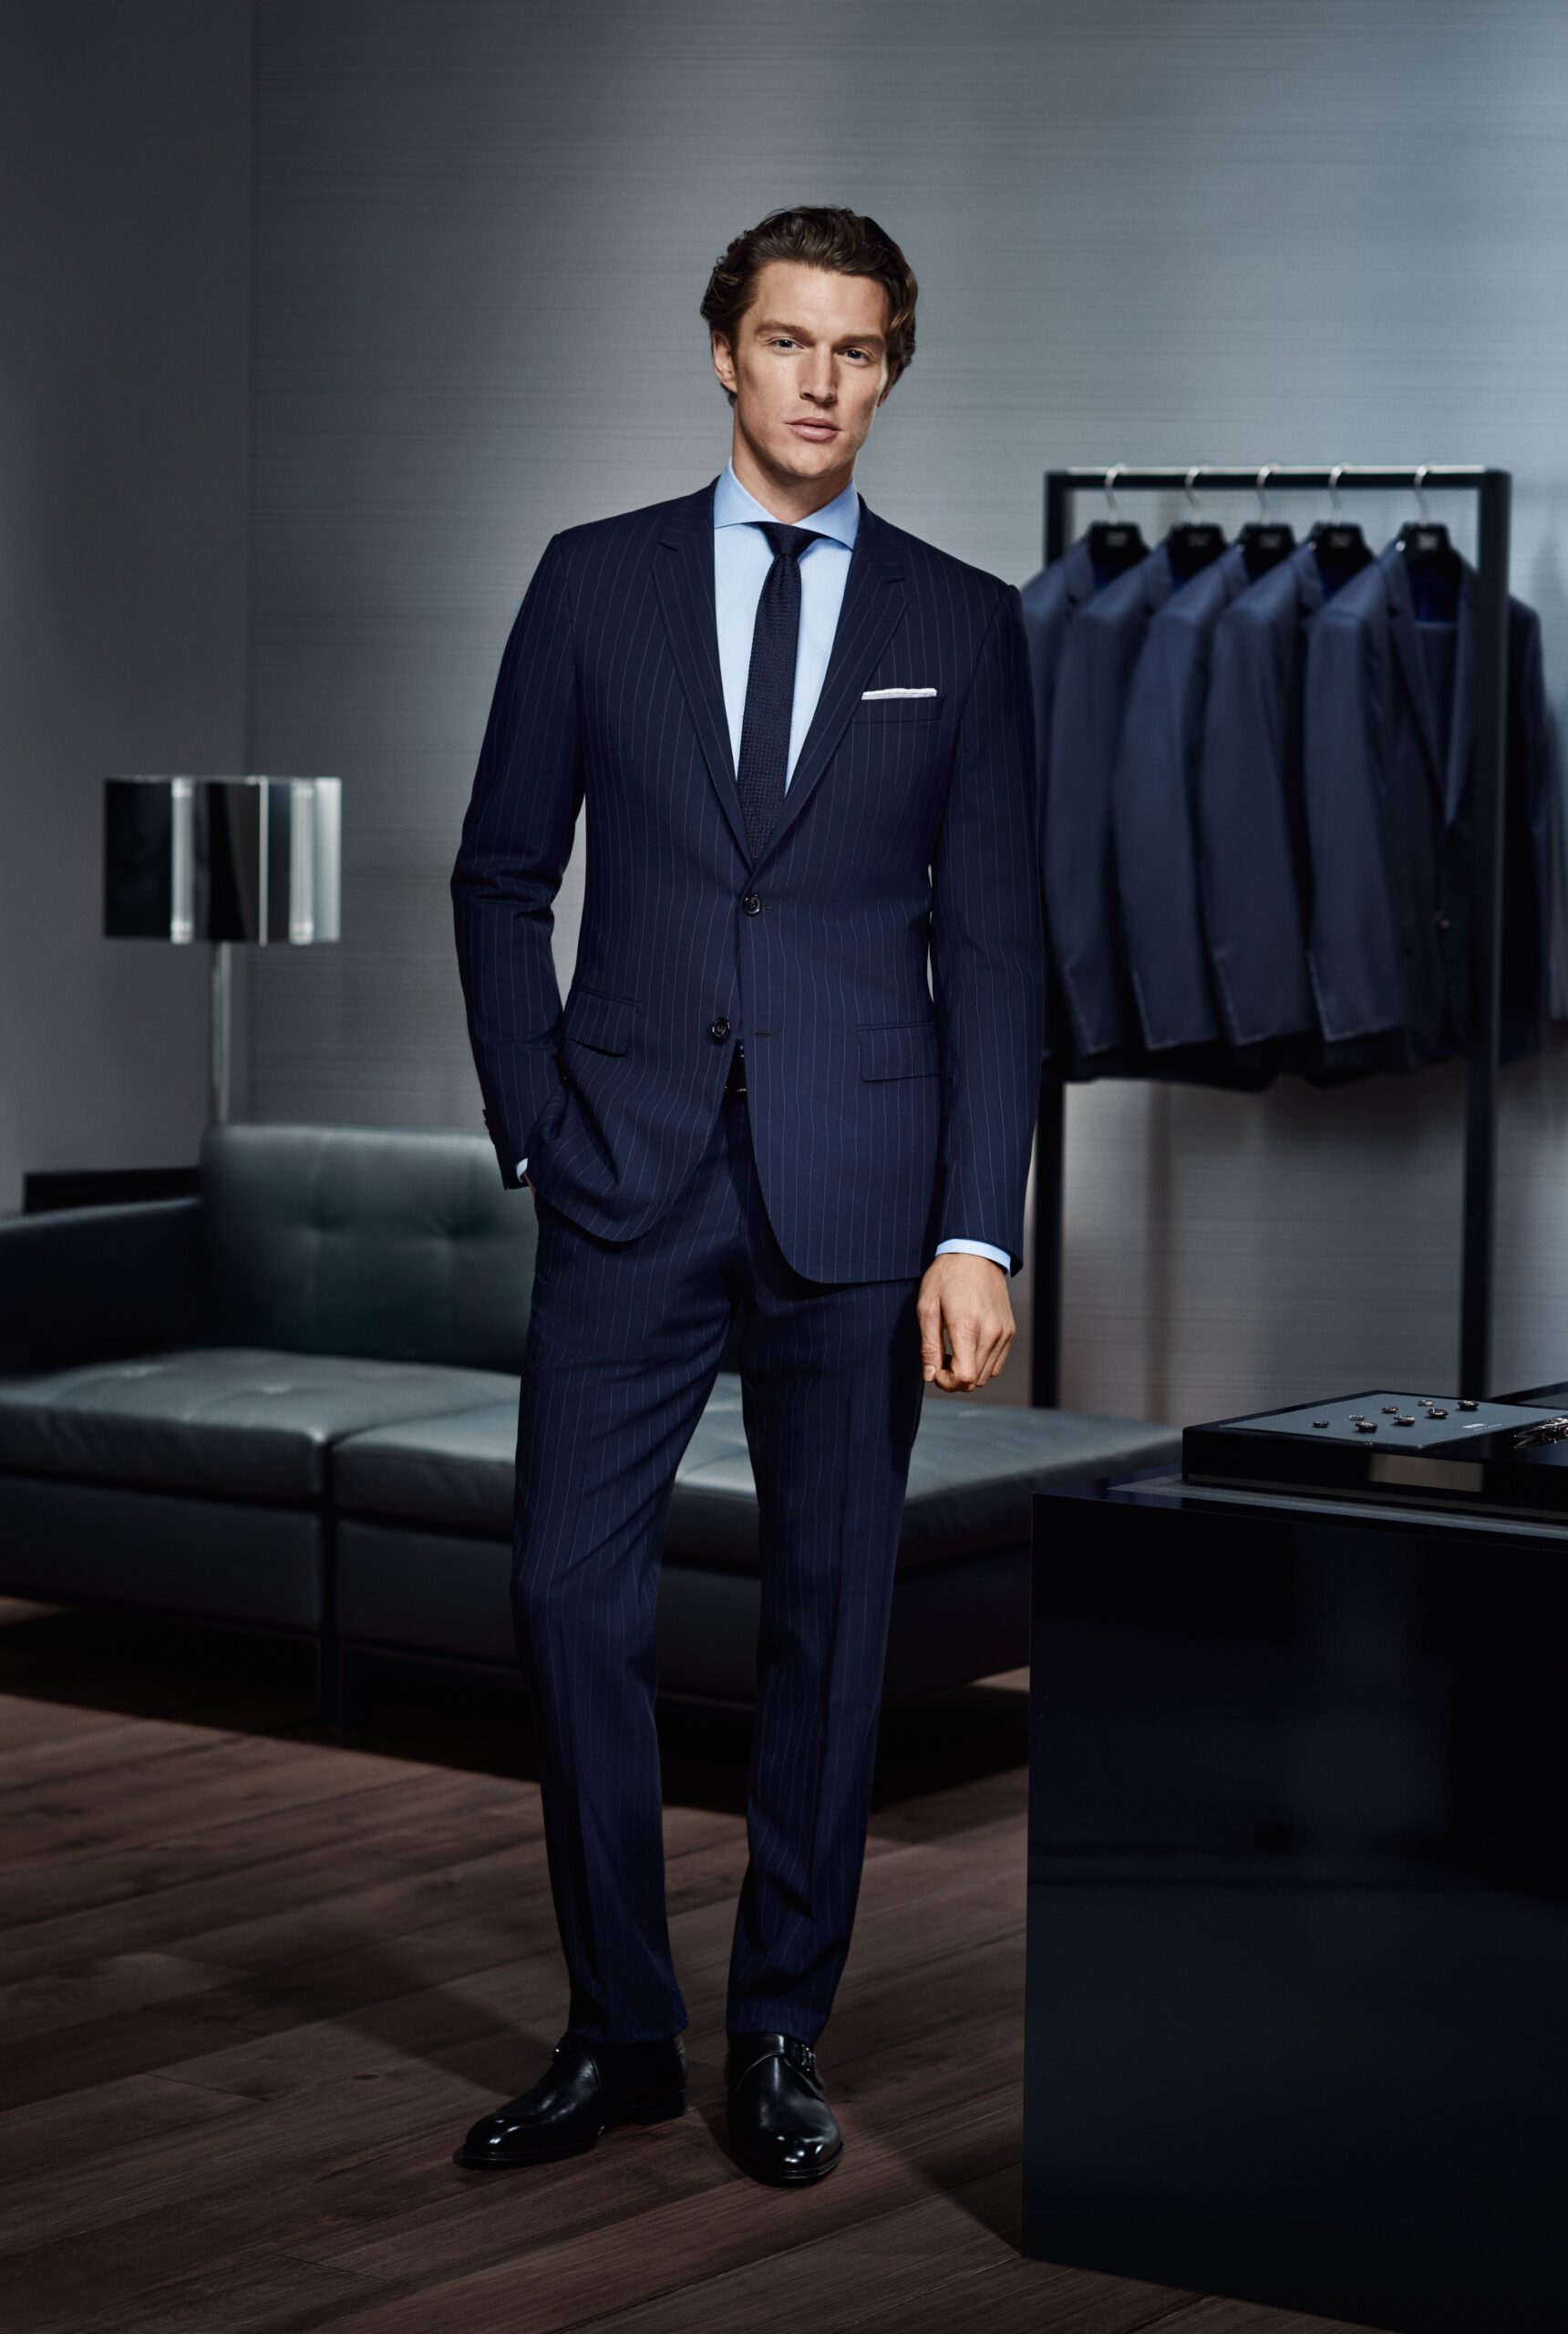 Business suits for men for formal
meetings